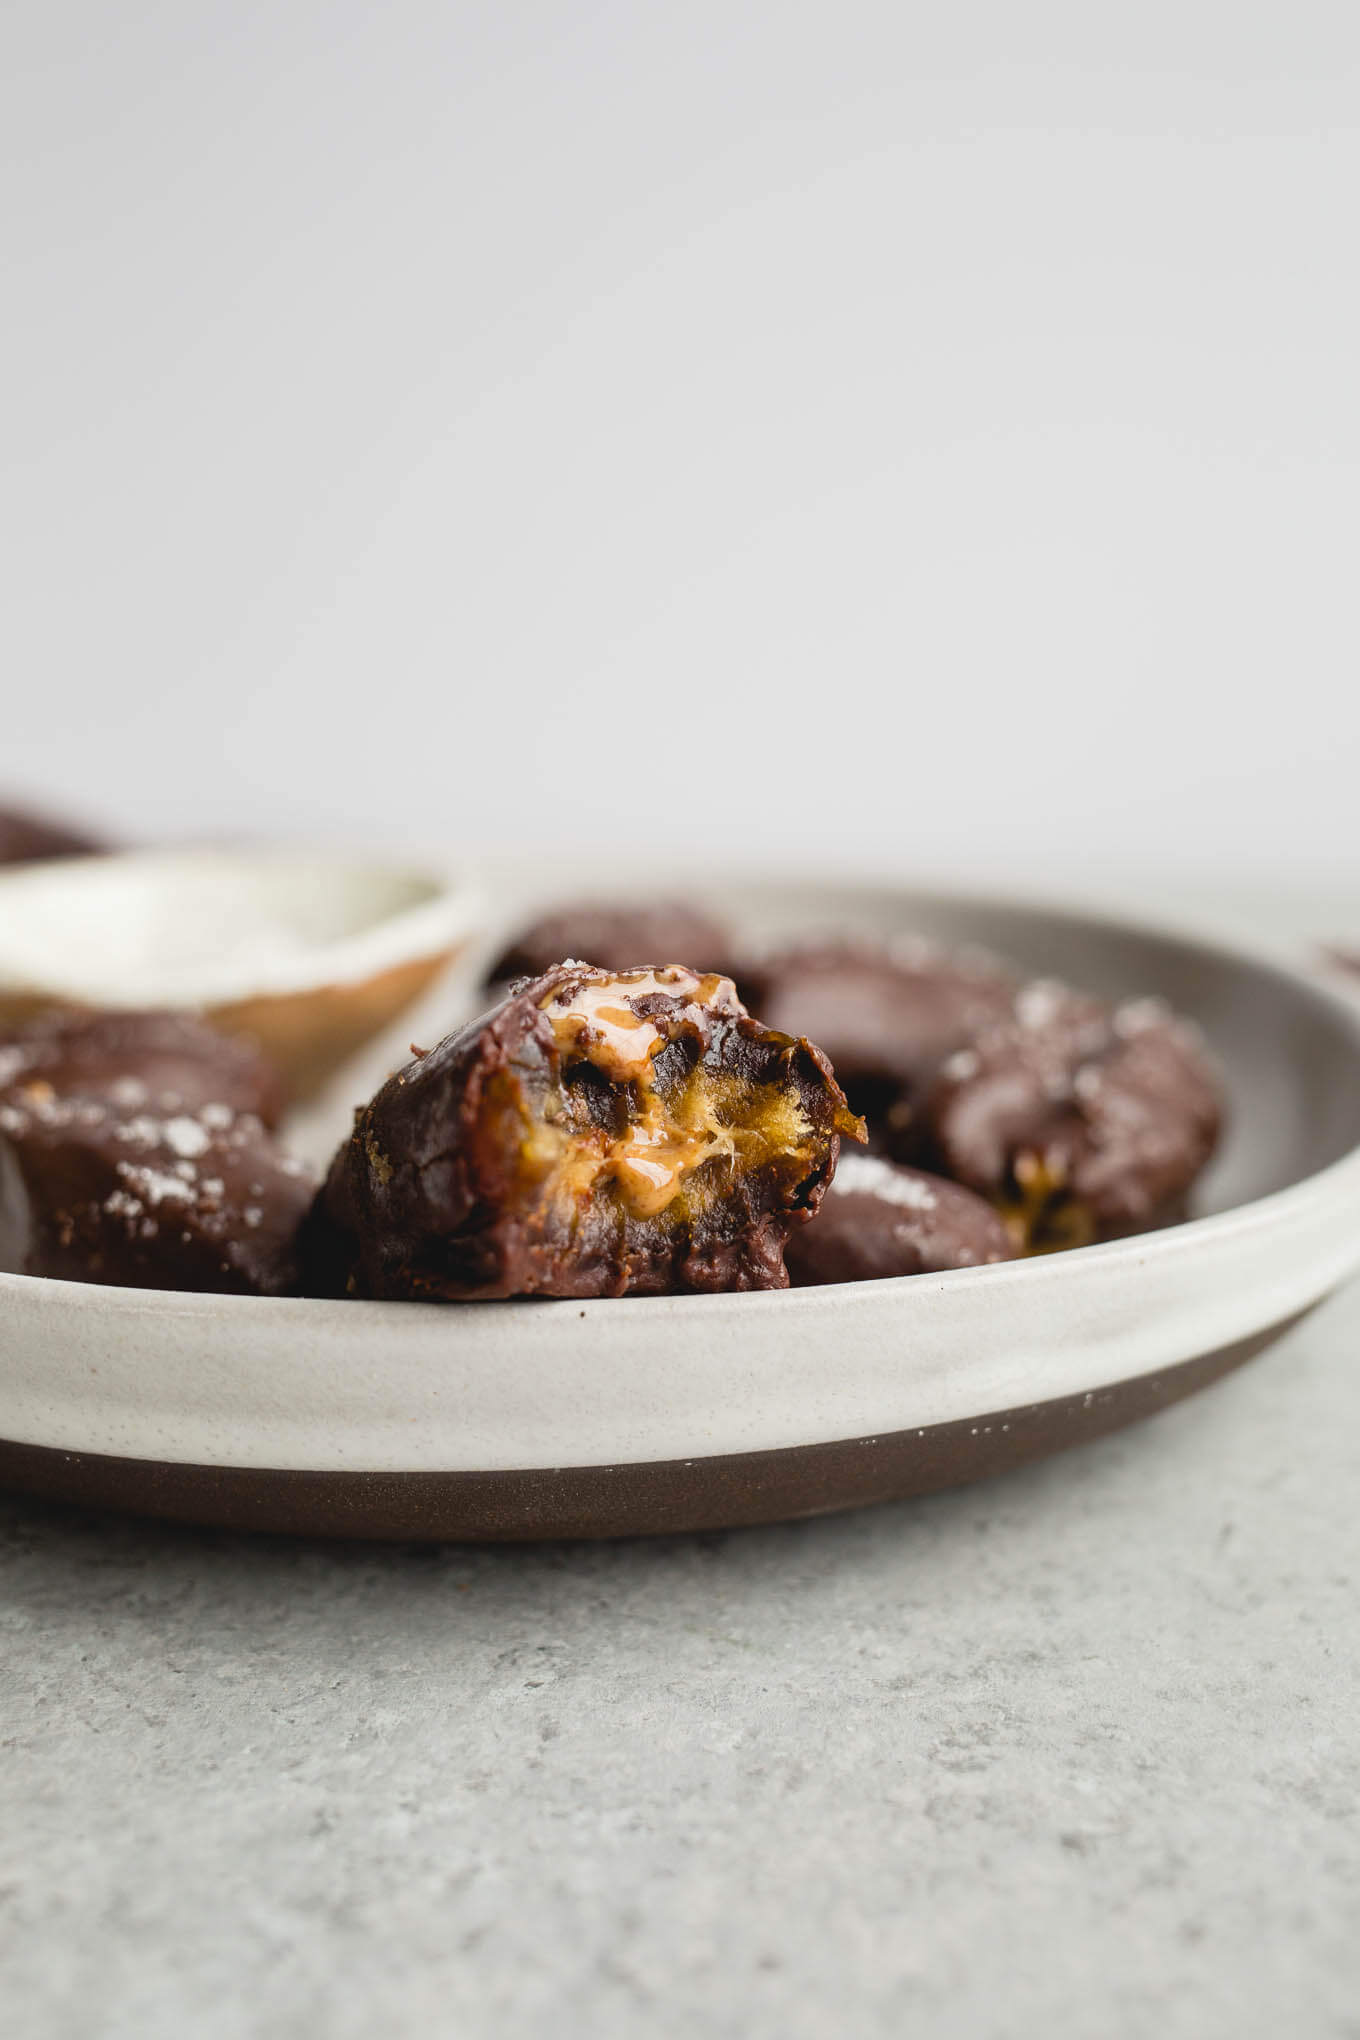 These Chocolate-Covered Almond Butter Stuffed Dates topped with sea salt are gluten-free, vegan, and refined sugar-free. Perfect for a snack or dessert!